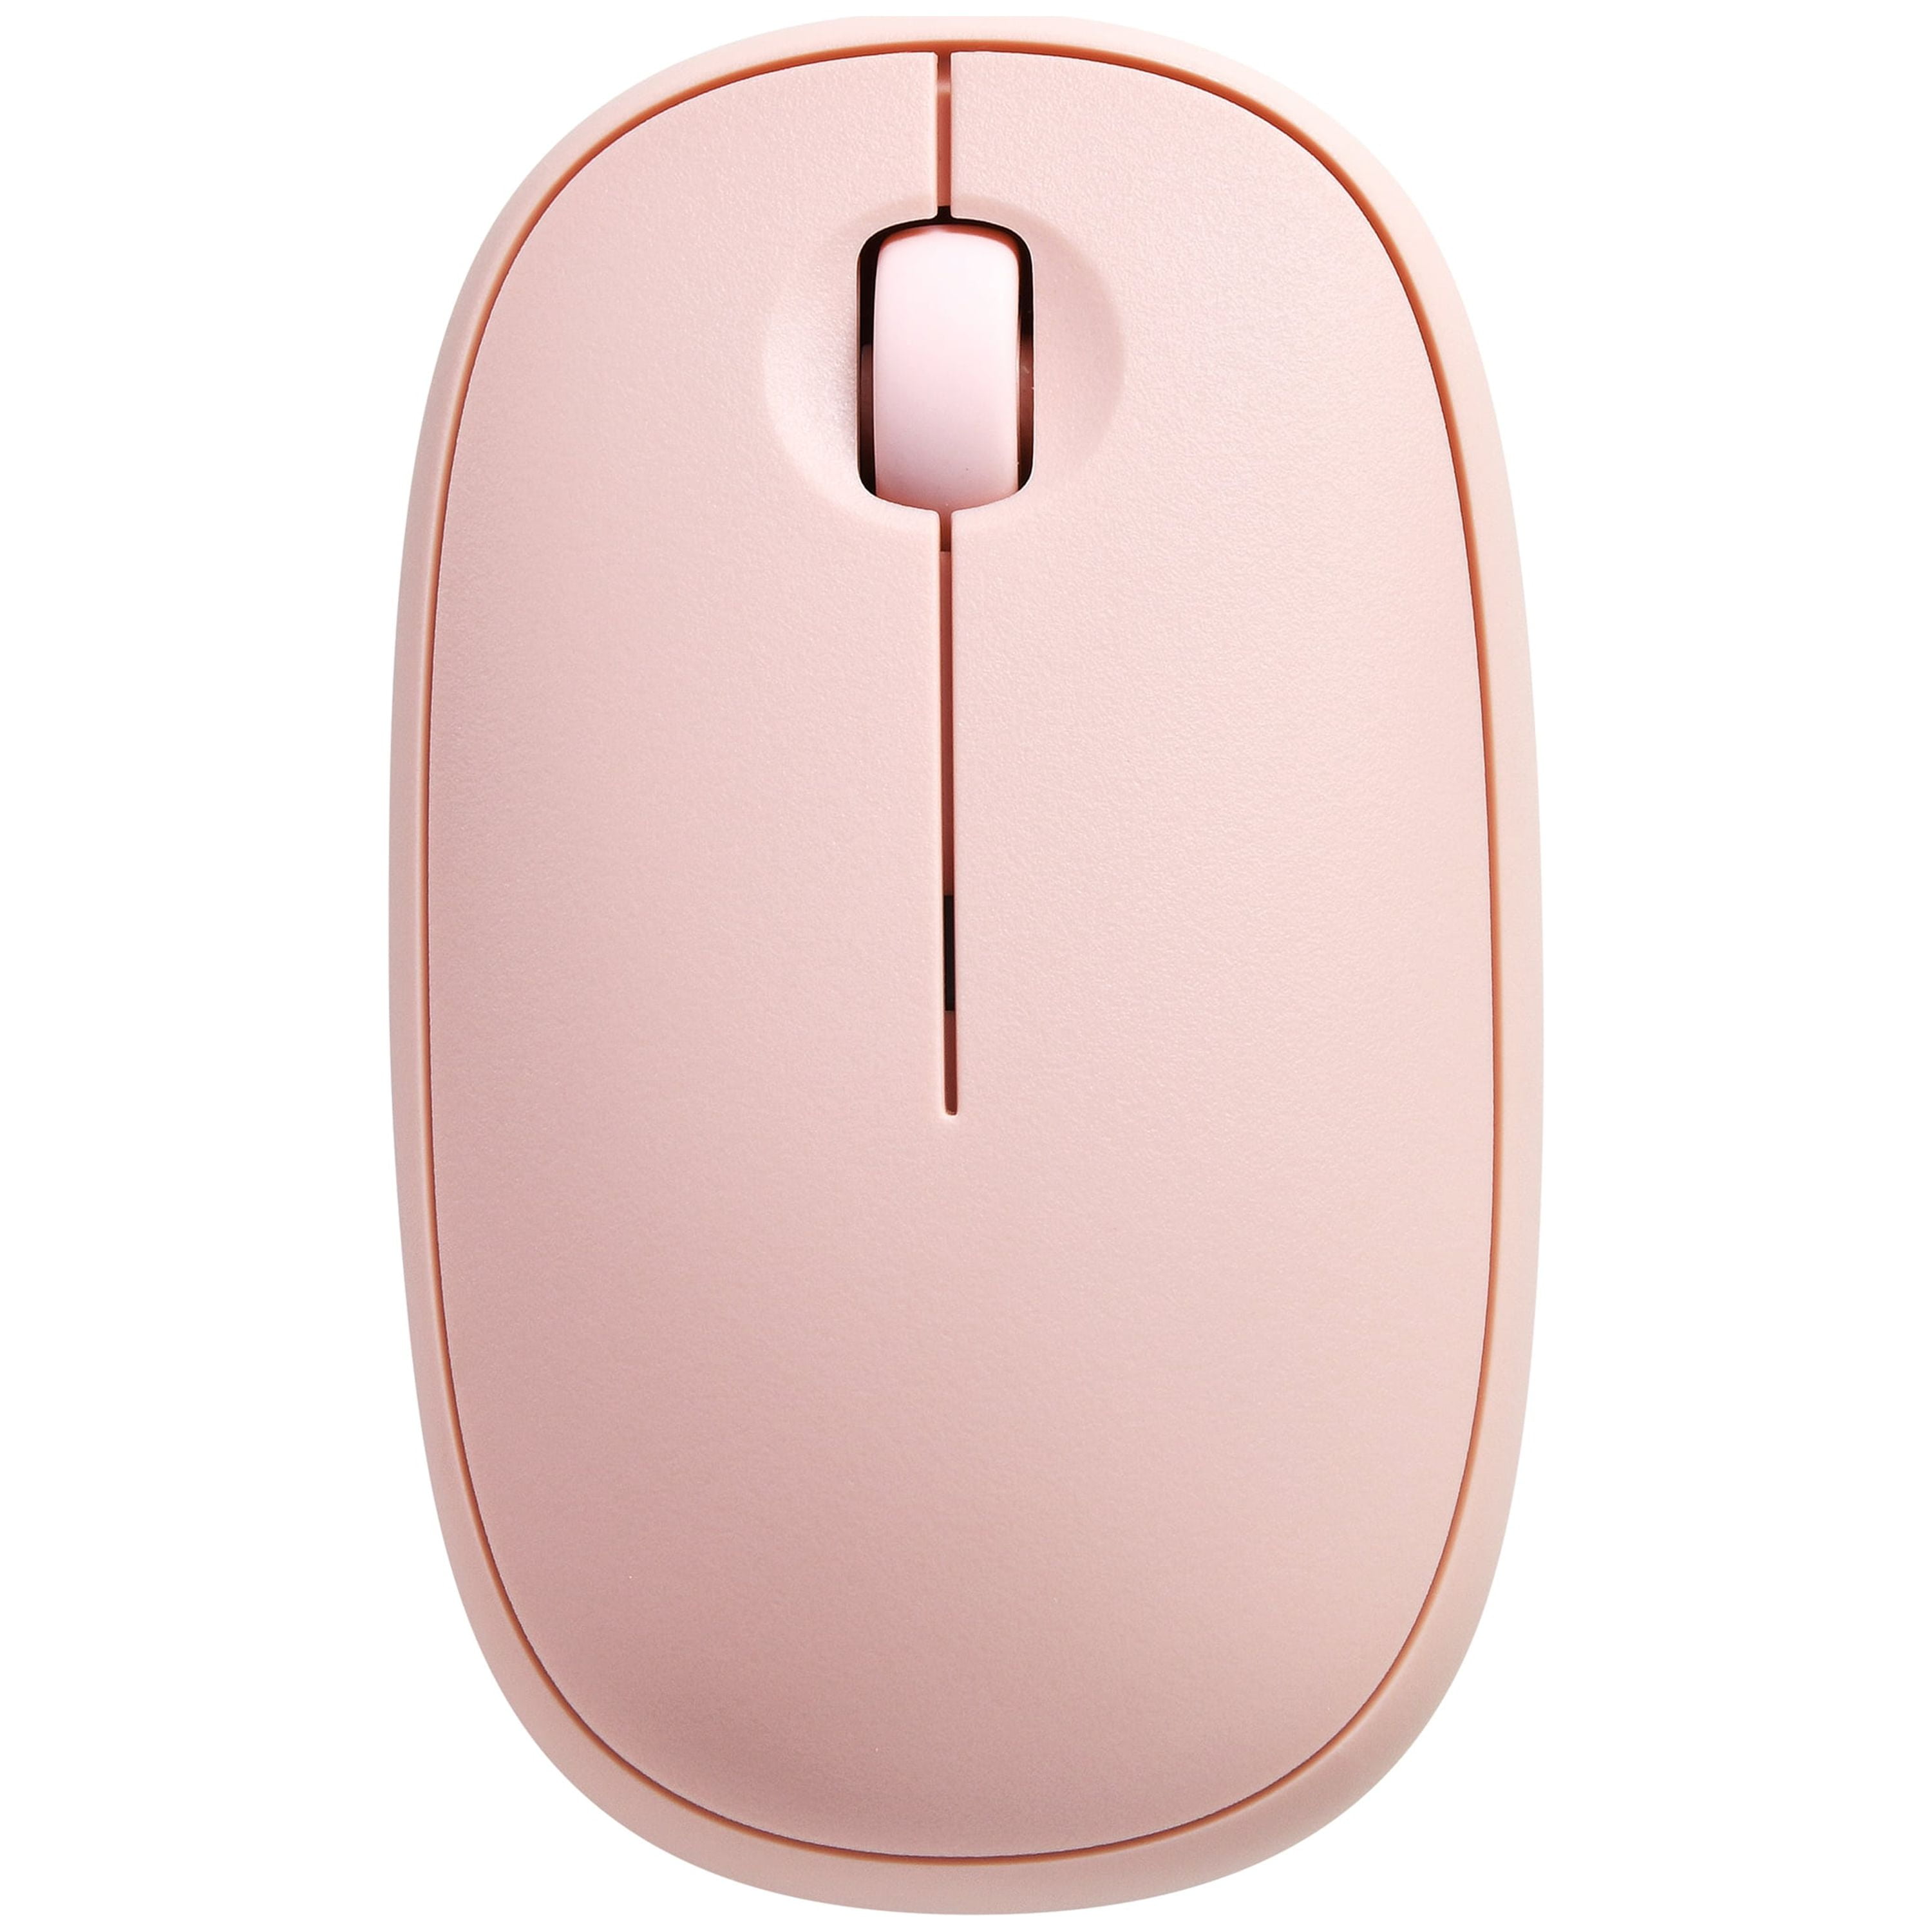 onn. Slim Wireless 3-Button Computer Mouse, Bluetooth and Nano USB Receiver, 1600 DPI, Pink